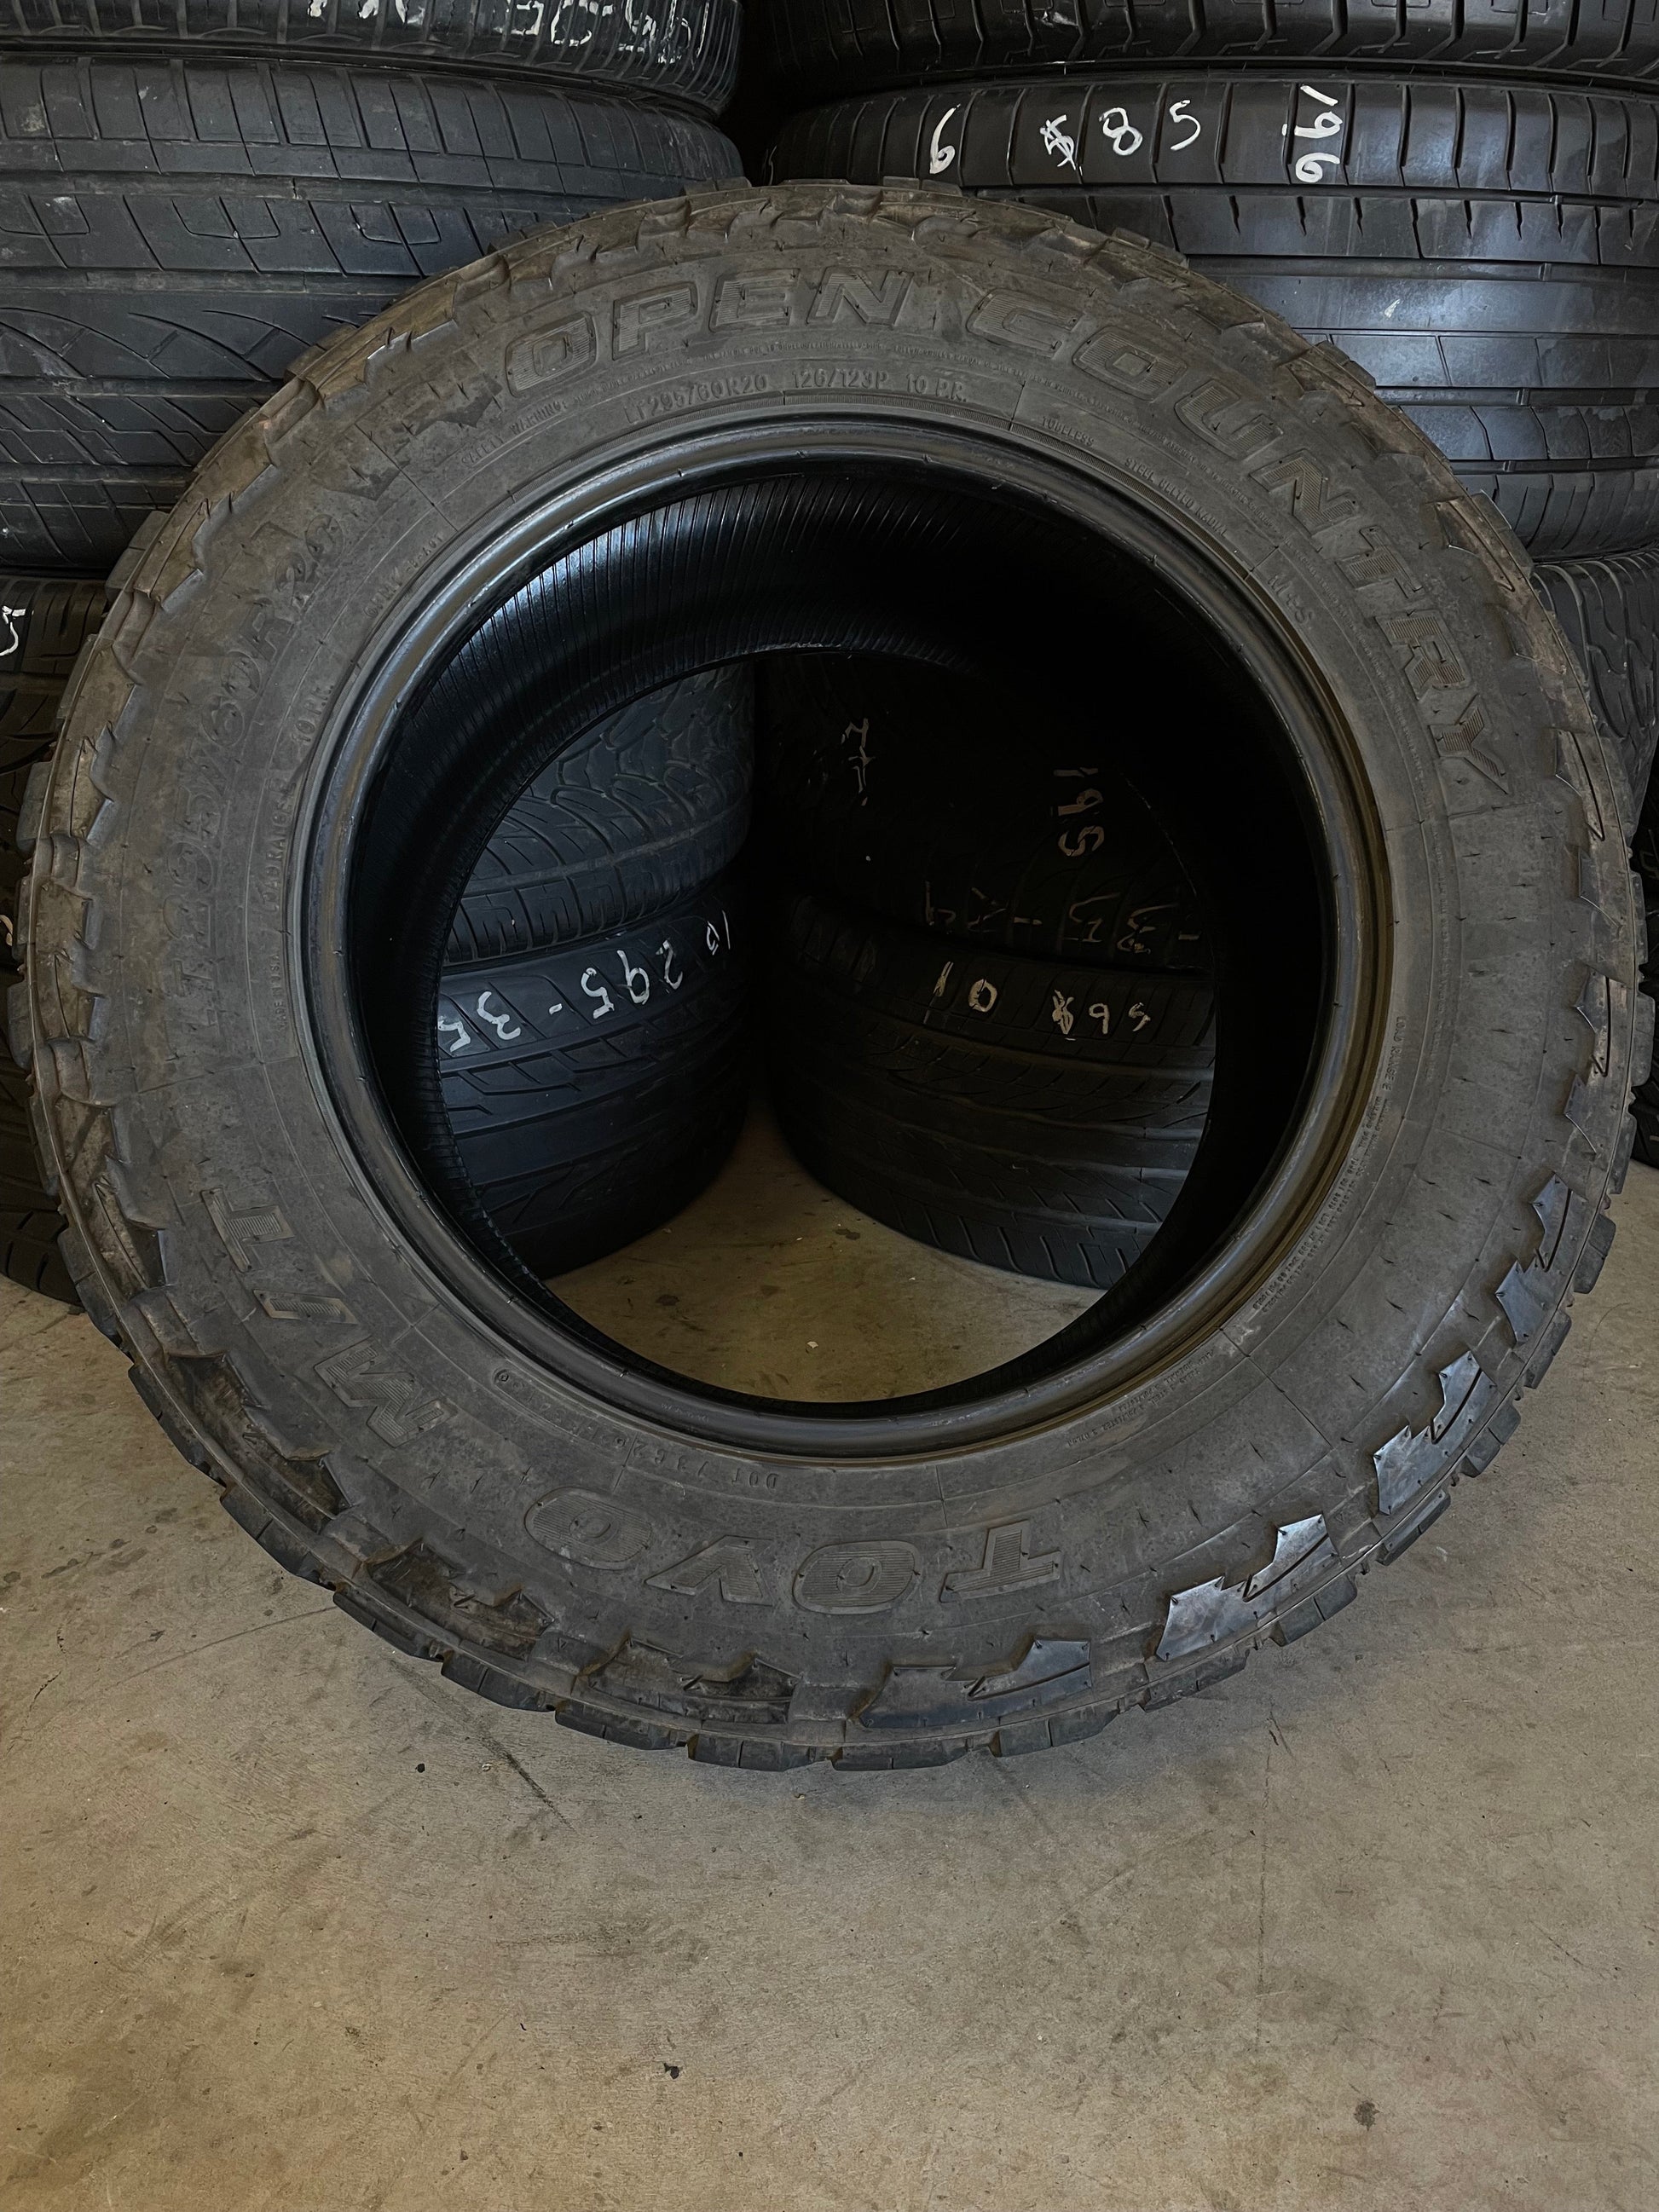 PAIR OF 295/60R20 TOYO Open Country M/T 126/123P E - Used Tires